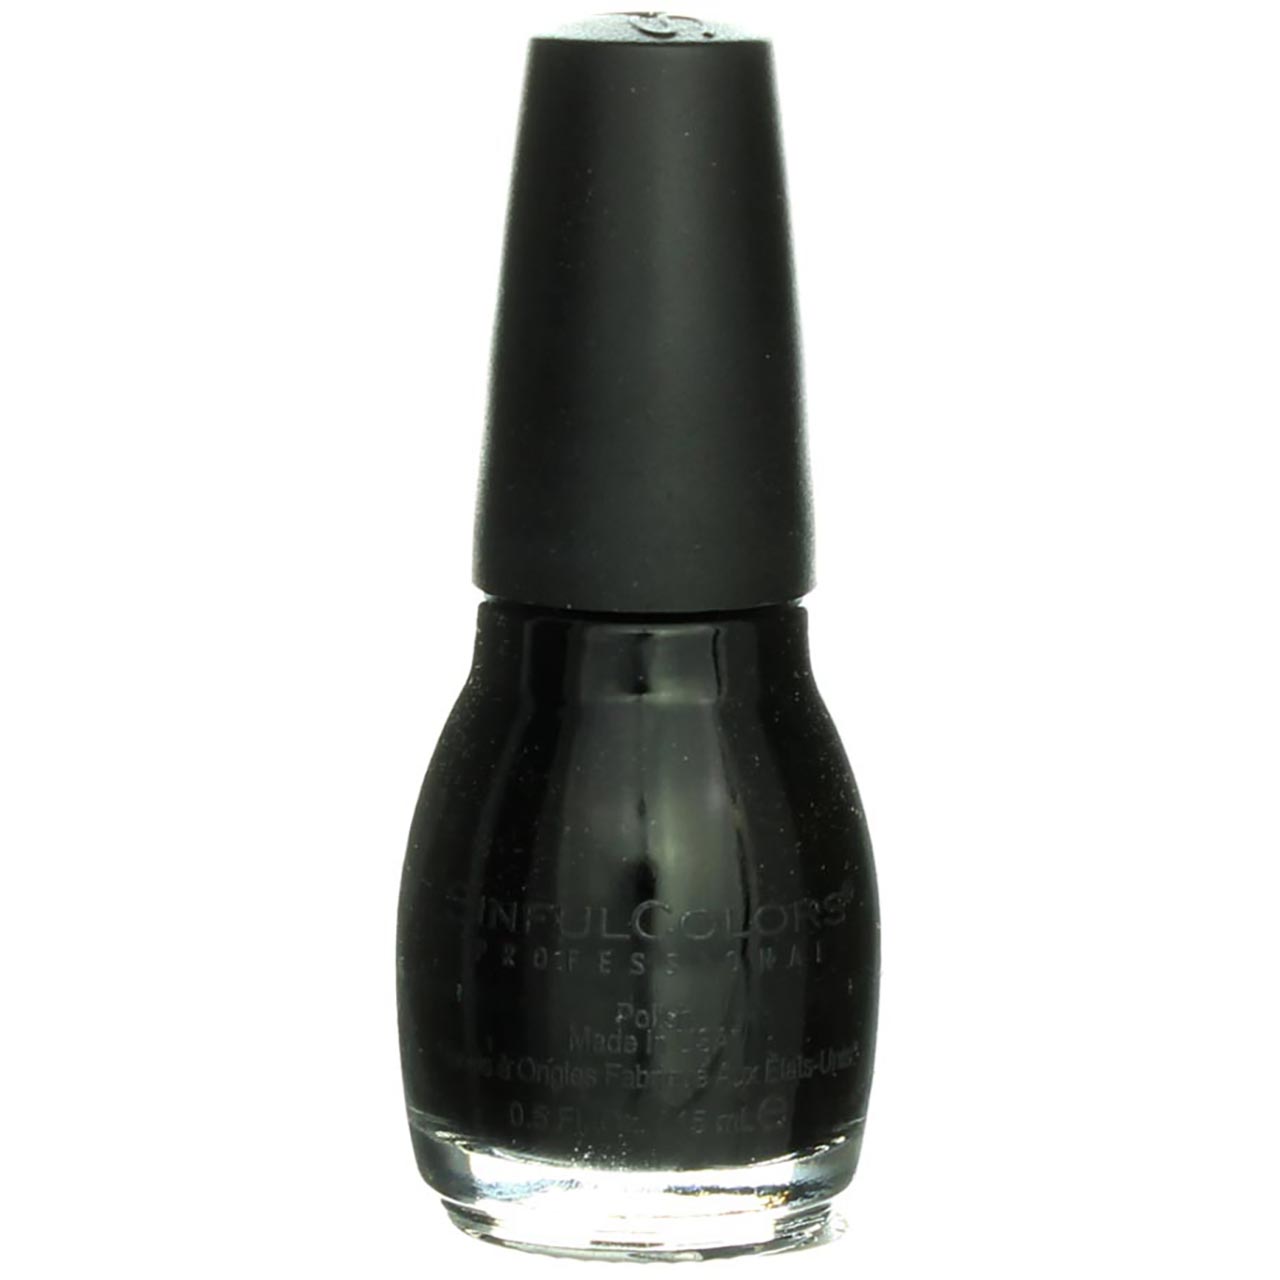 Sinful Colors Professional Nail Enamel, Black On Black 0.50 oz (Pack of 3) - image 1 of 4